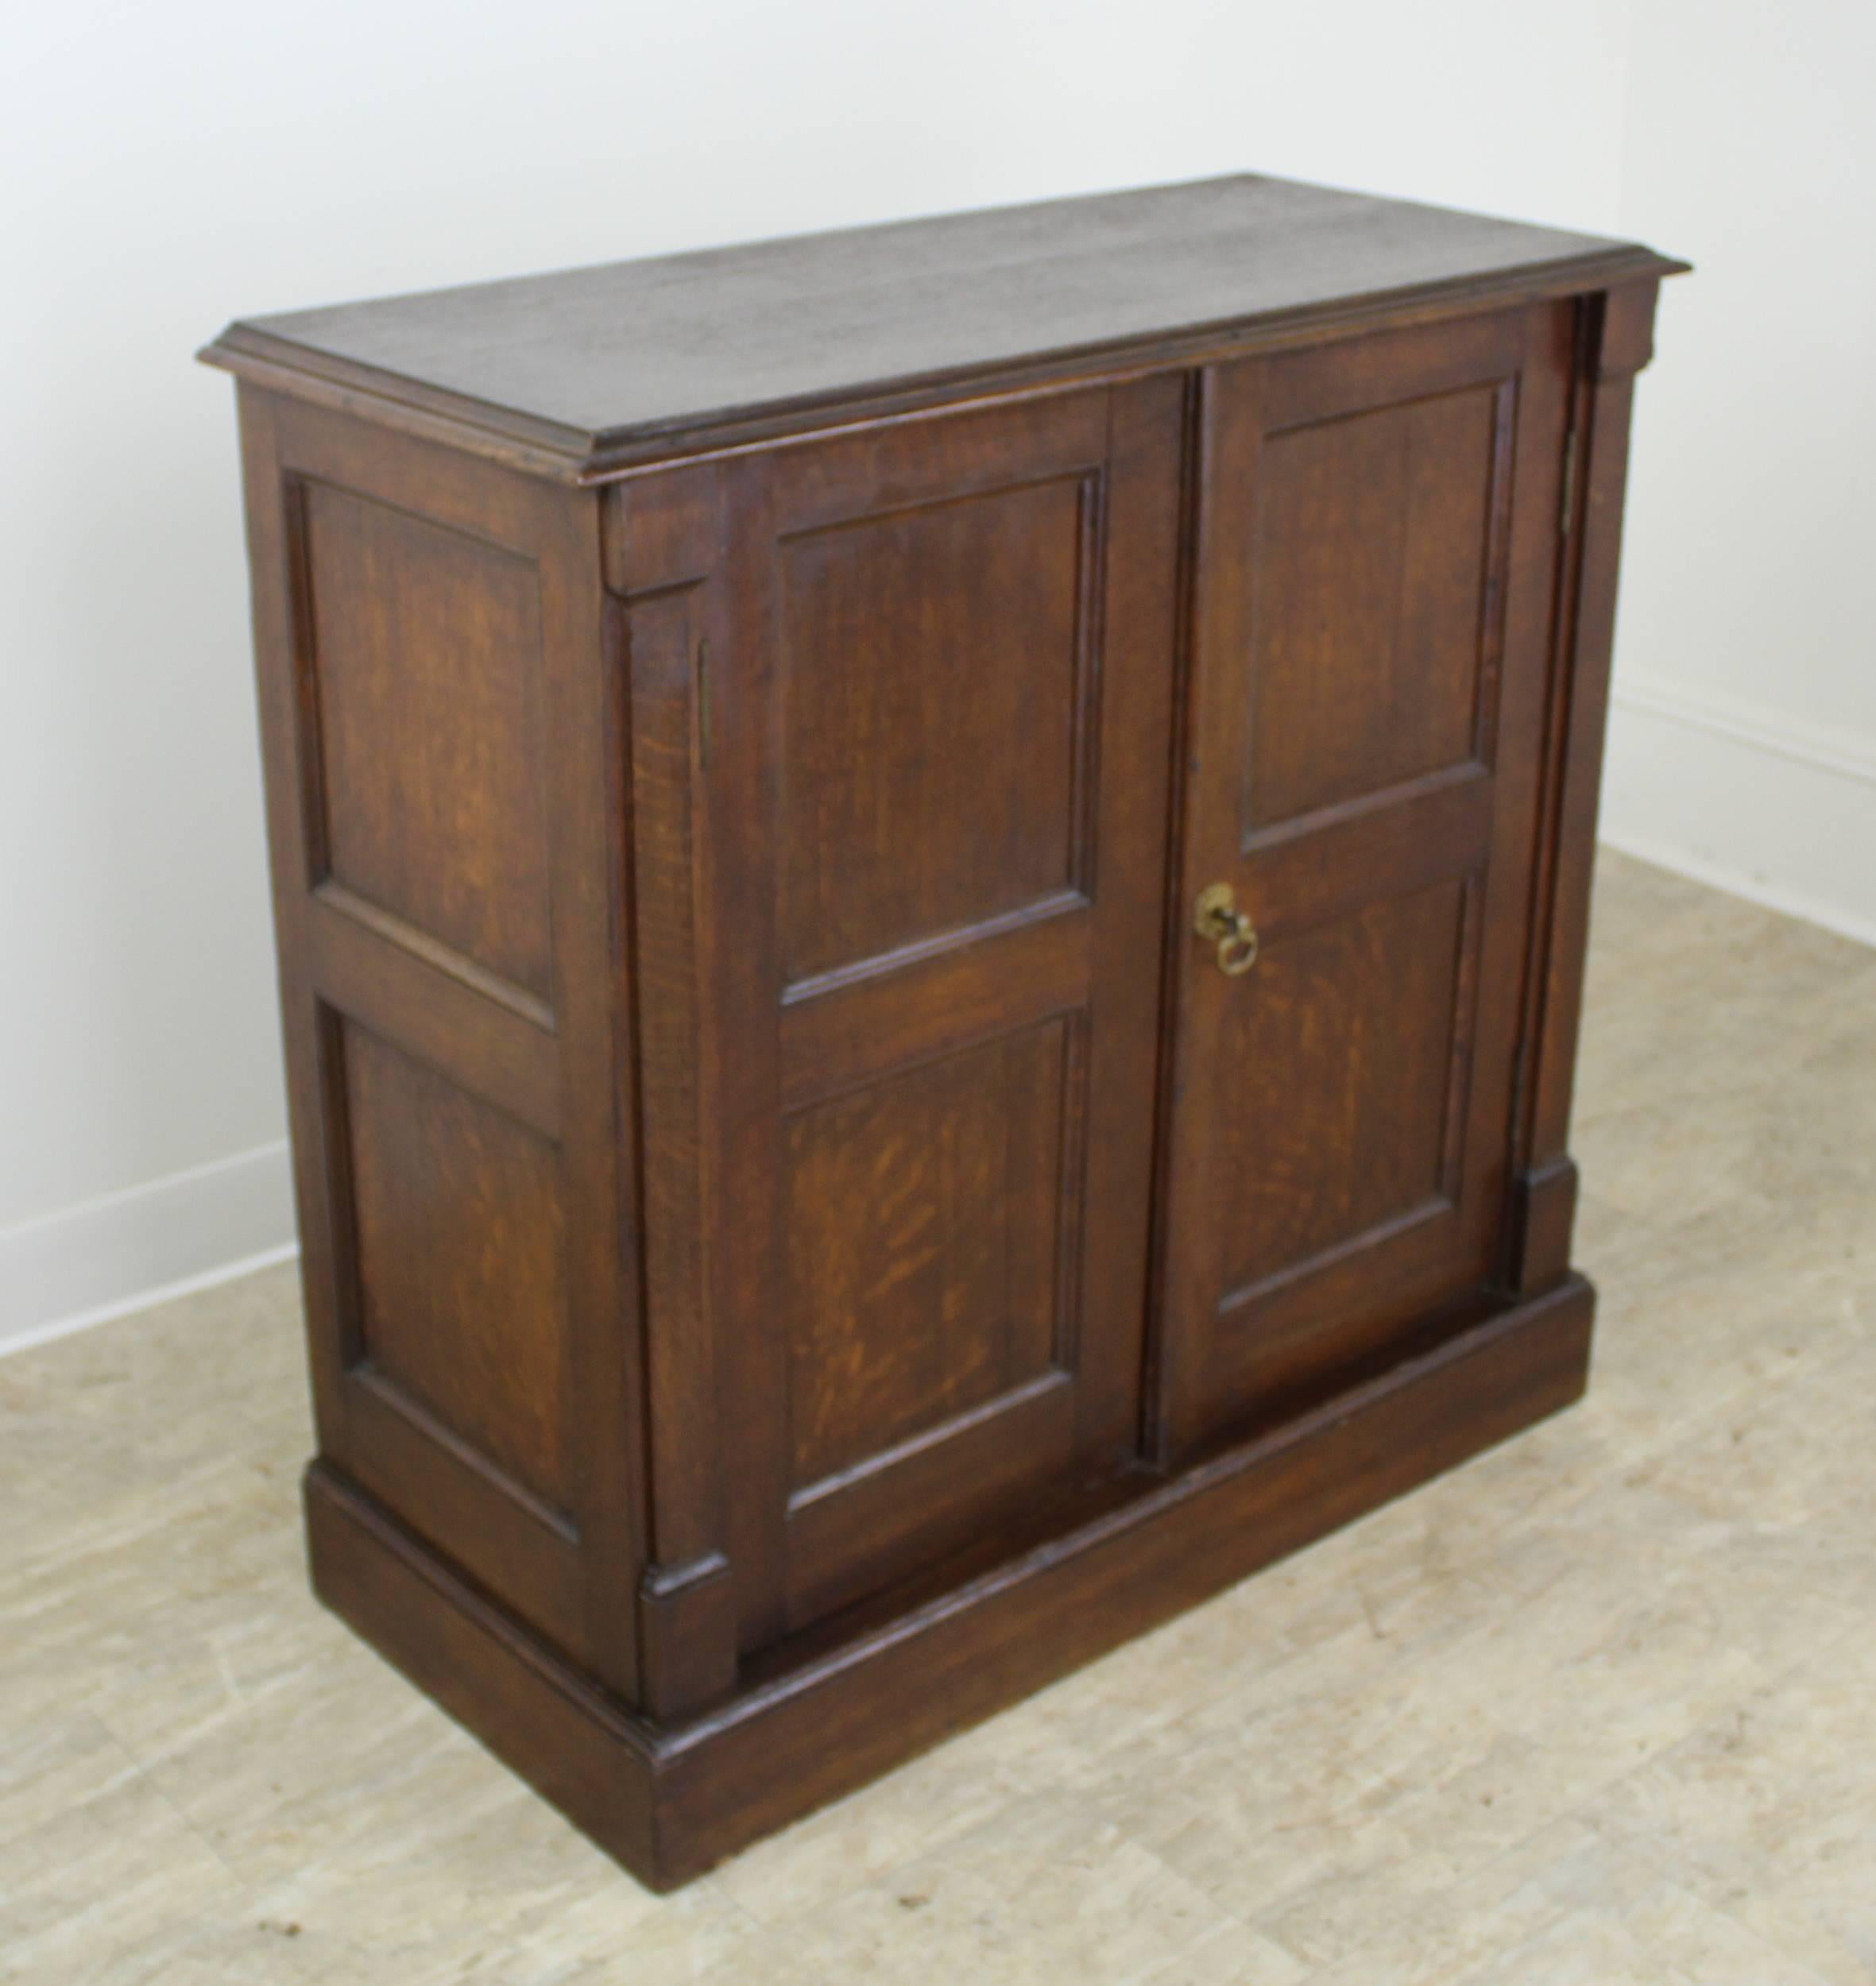 A small charming cupboard or cabinet from England. Lovely molding, inset panels, and baseboards in rich dark oak. The single interior shelf is not adjustable, though if removed, this would make an excellent television cabinet. Single brass pull on